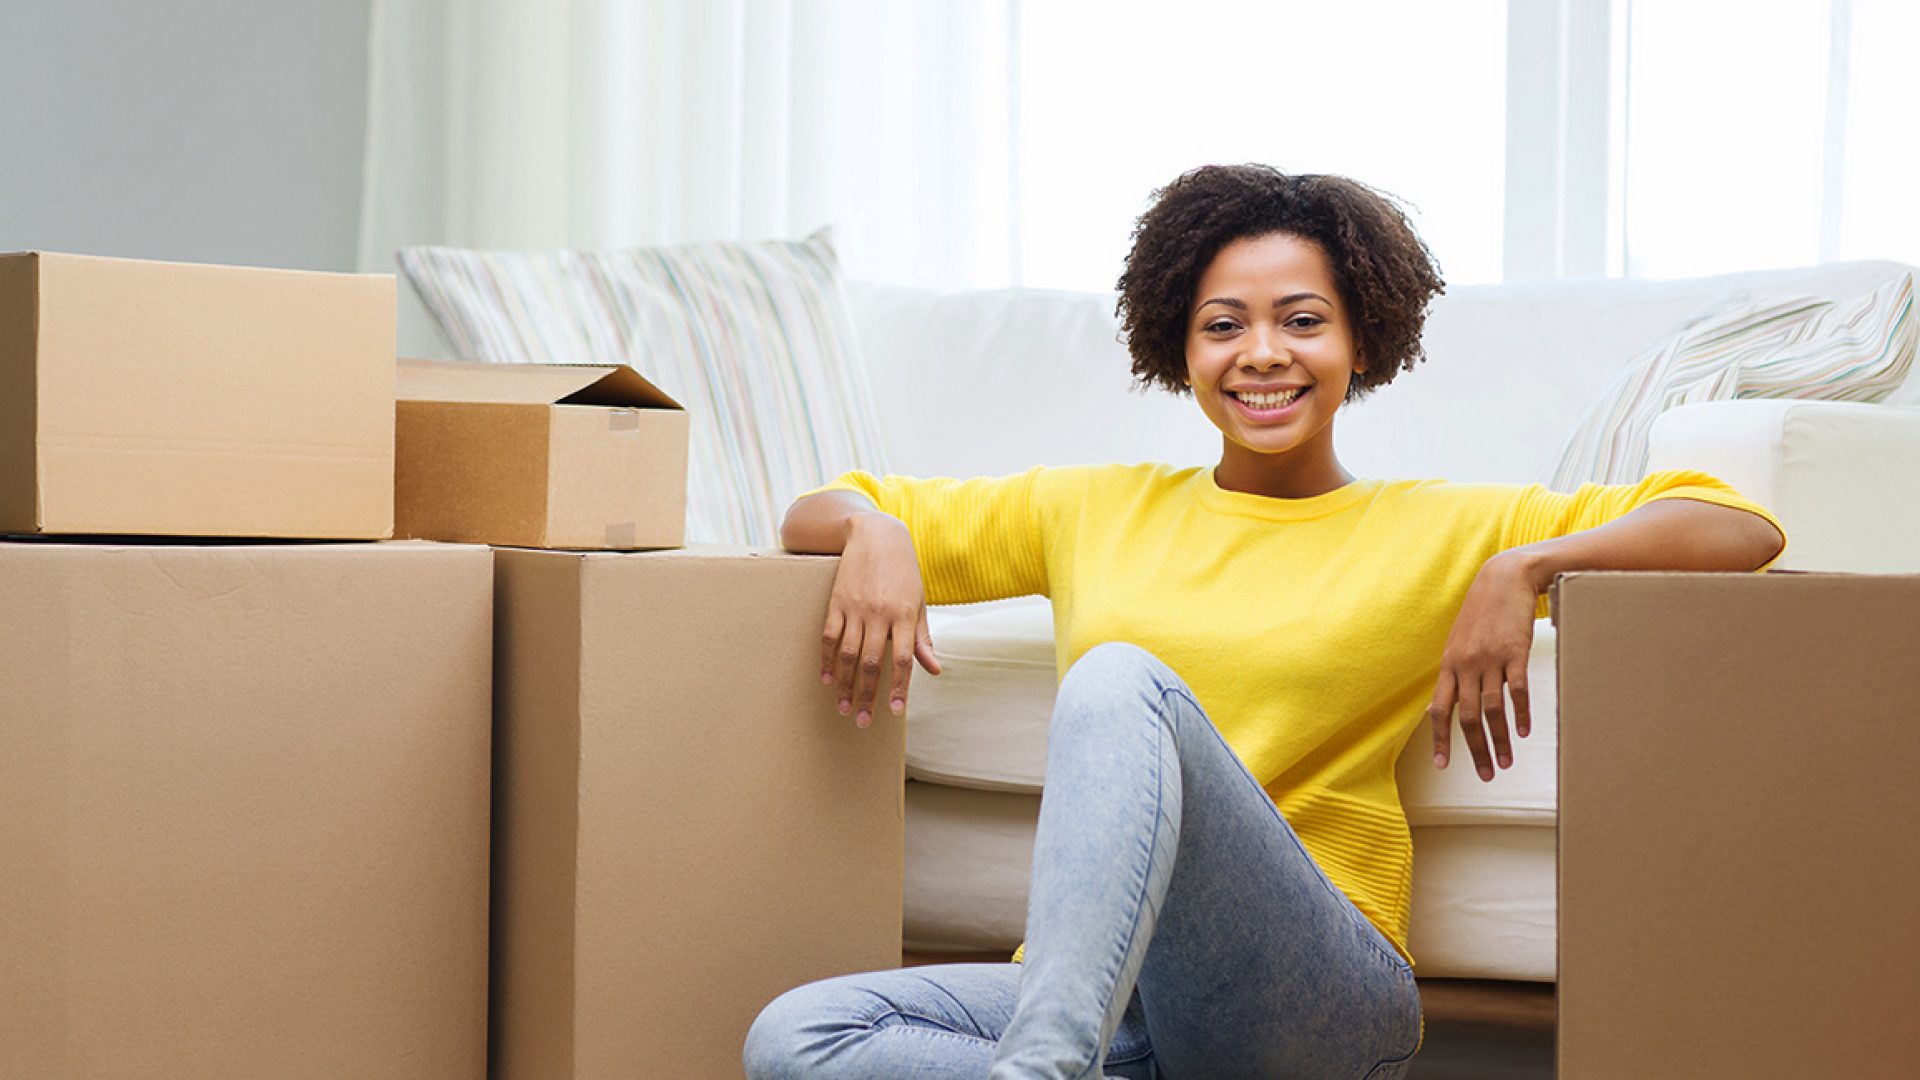 7 ways to save on professional movers